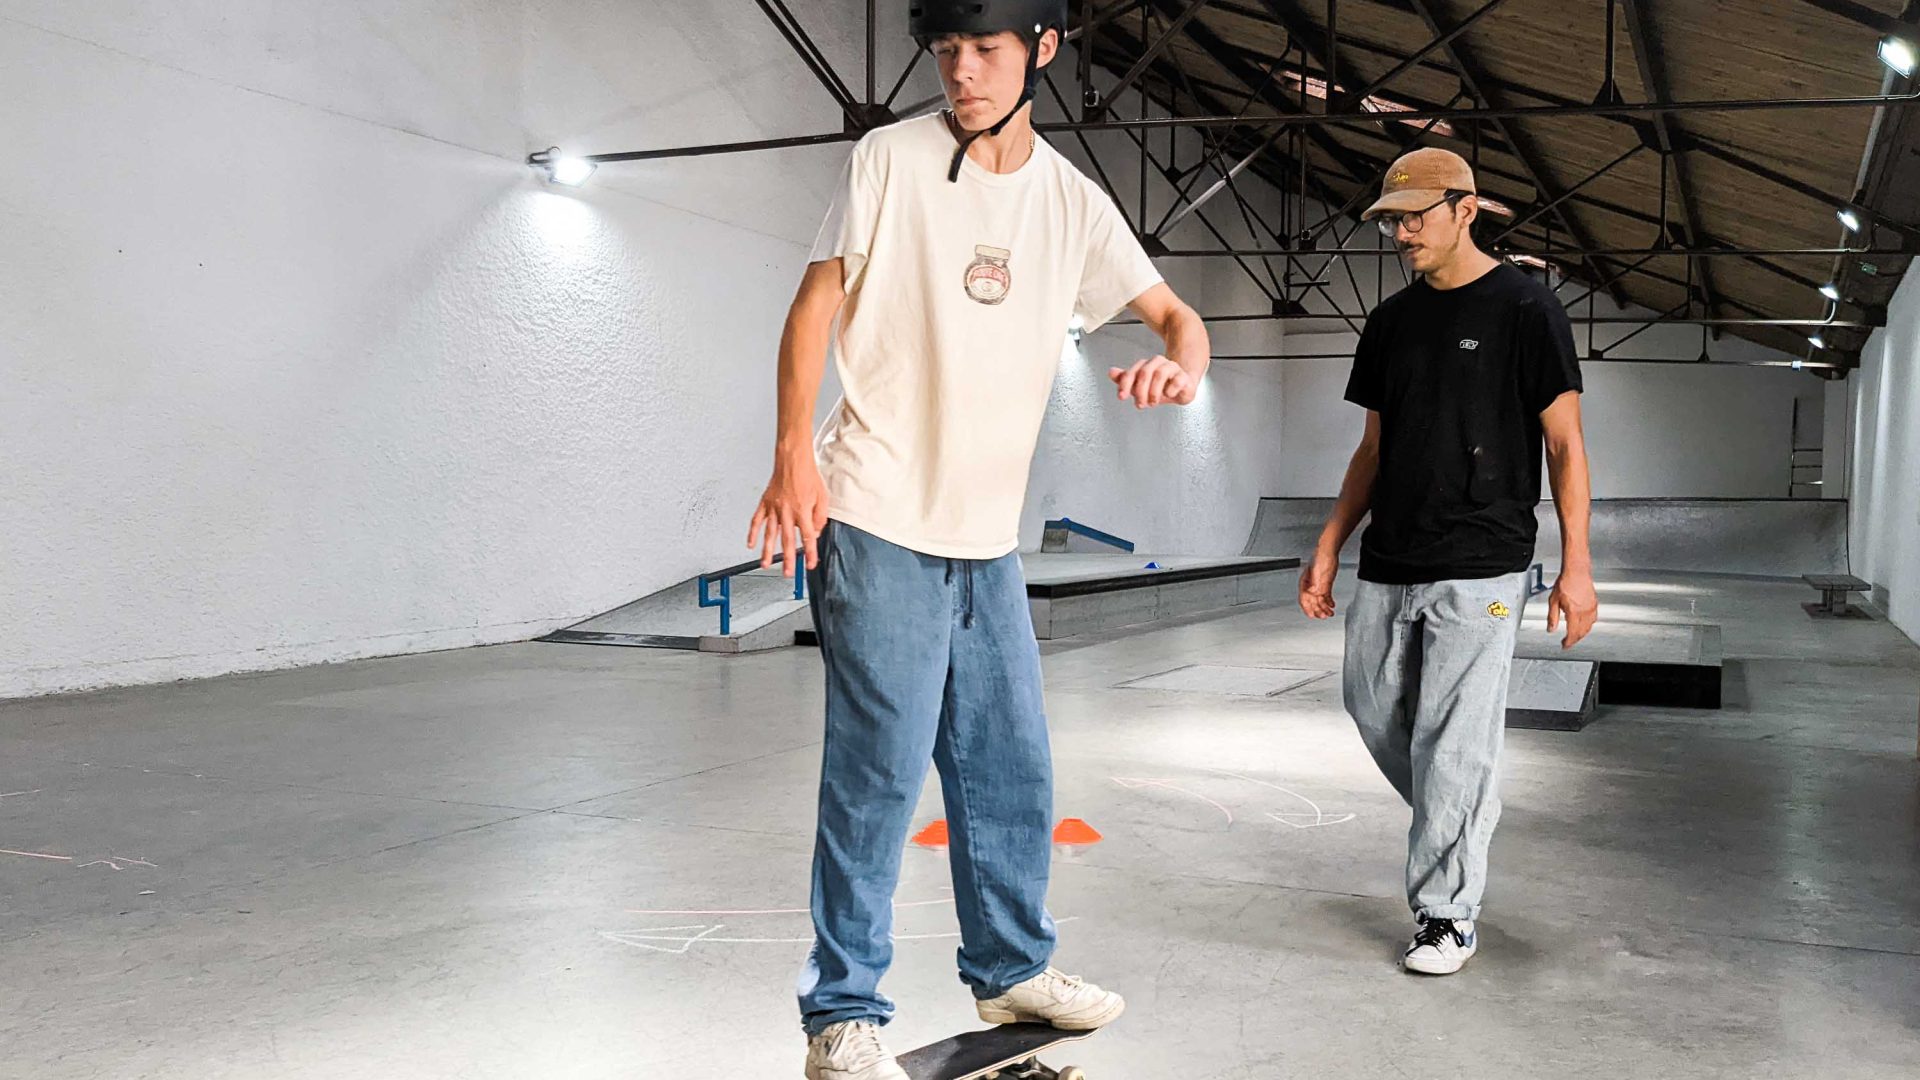 A young teenager learns to skate, watched on by his instructor.